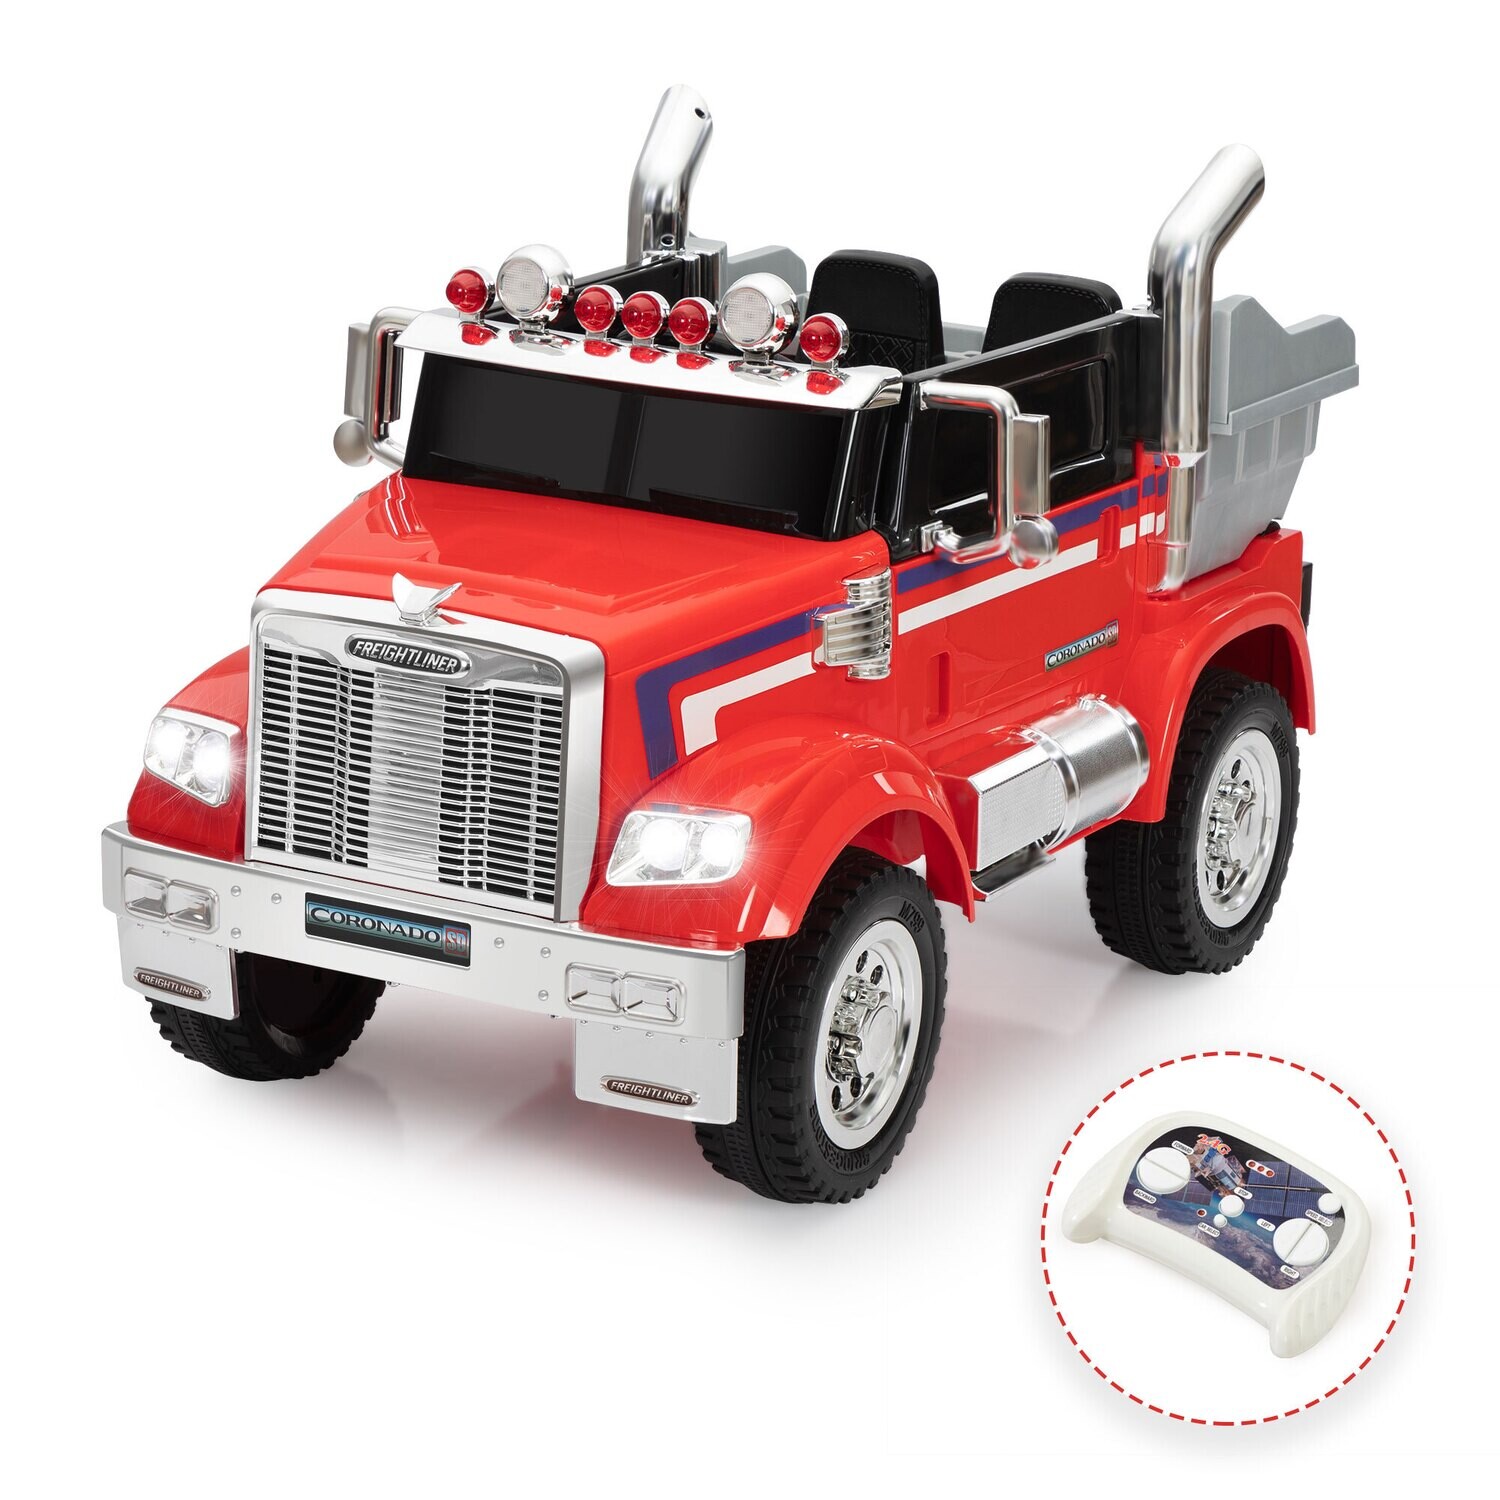 12V Kids Battery Electric Ride On Car Toy, Optimus Prime Truck with Remote Control, Transformers Die-Cast Vehicle W/ Music, Rear Loader, Red, Options: Red+Polypropylene